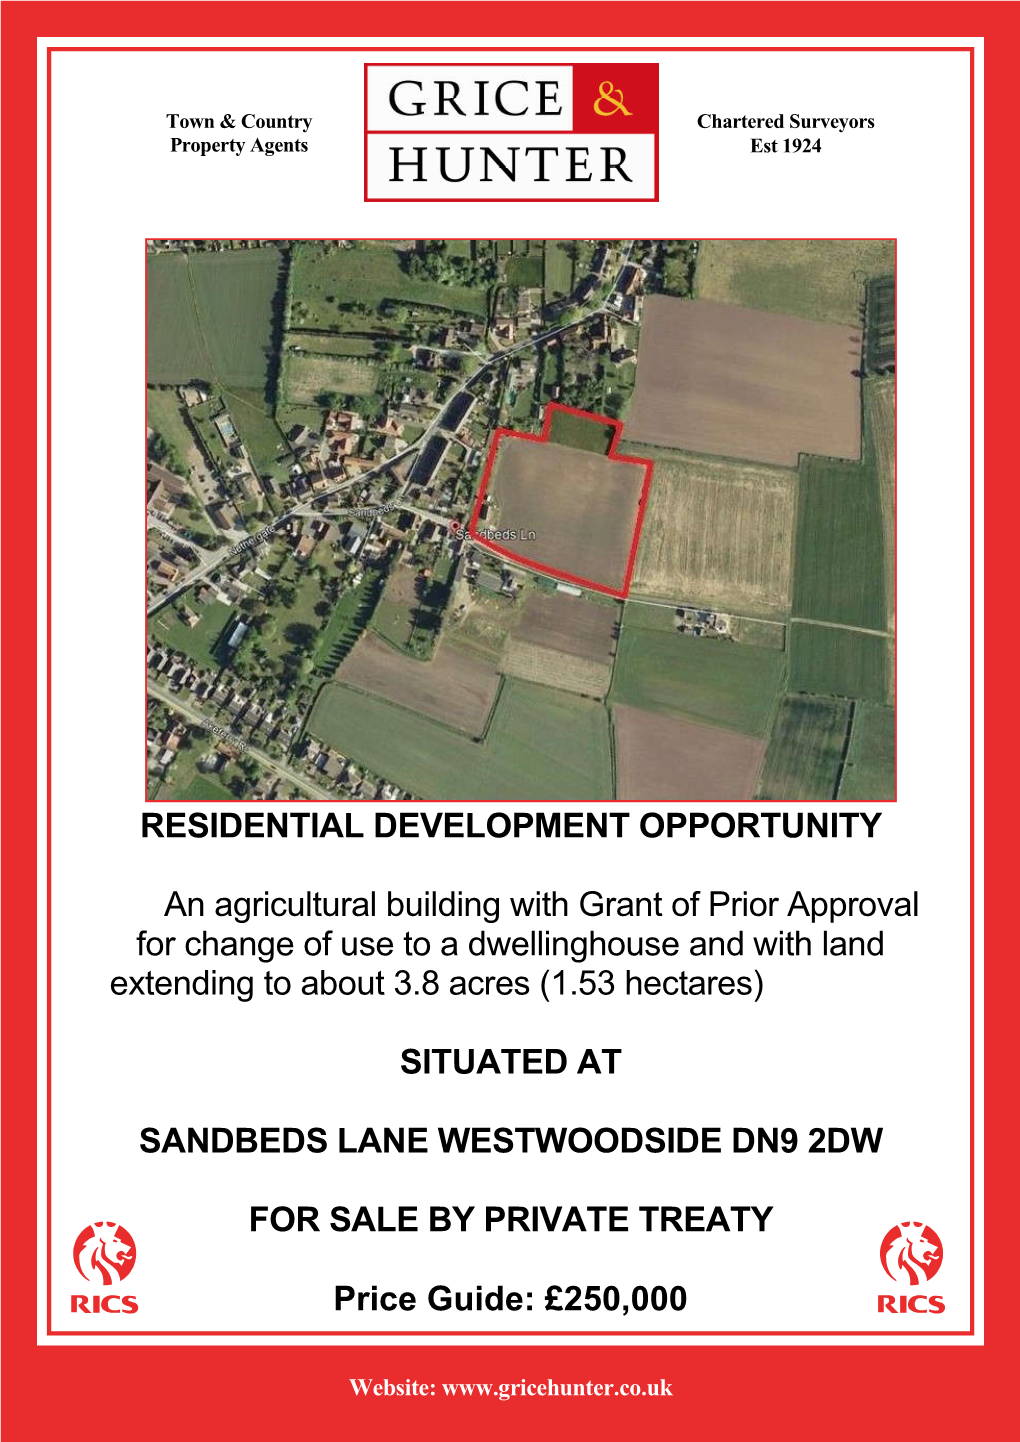 RESIDENTIAL DEVELOPMENT OPPORTUNITY an Agricultural Building with Grant of Prior Approval for Change of Use to a Dwellinghouse A